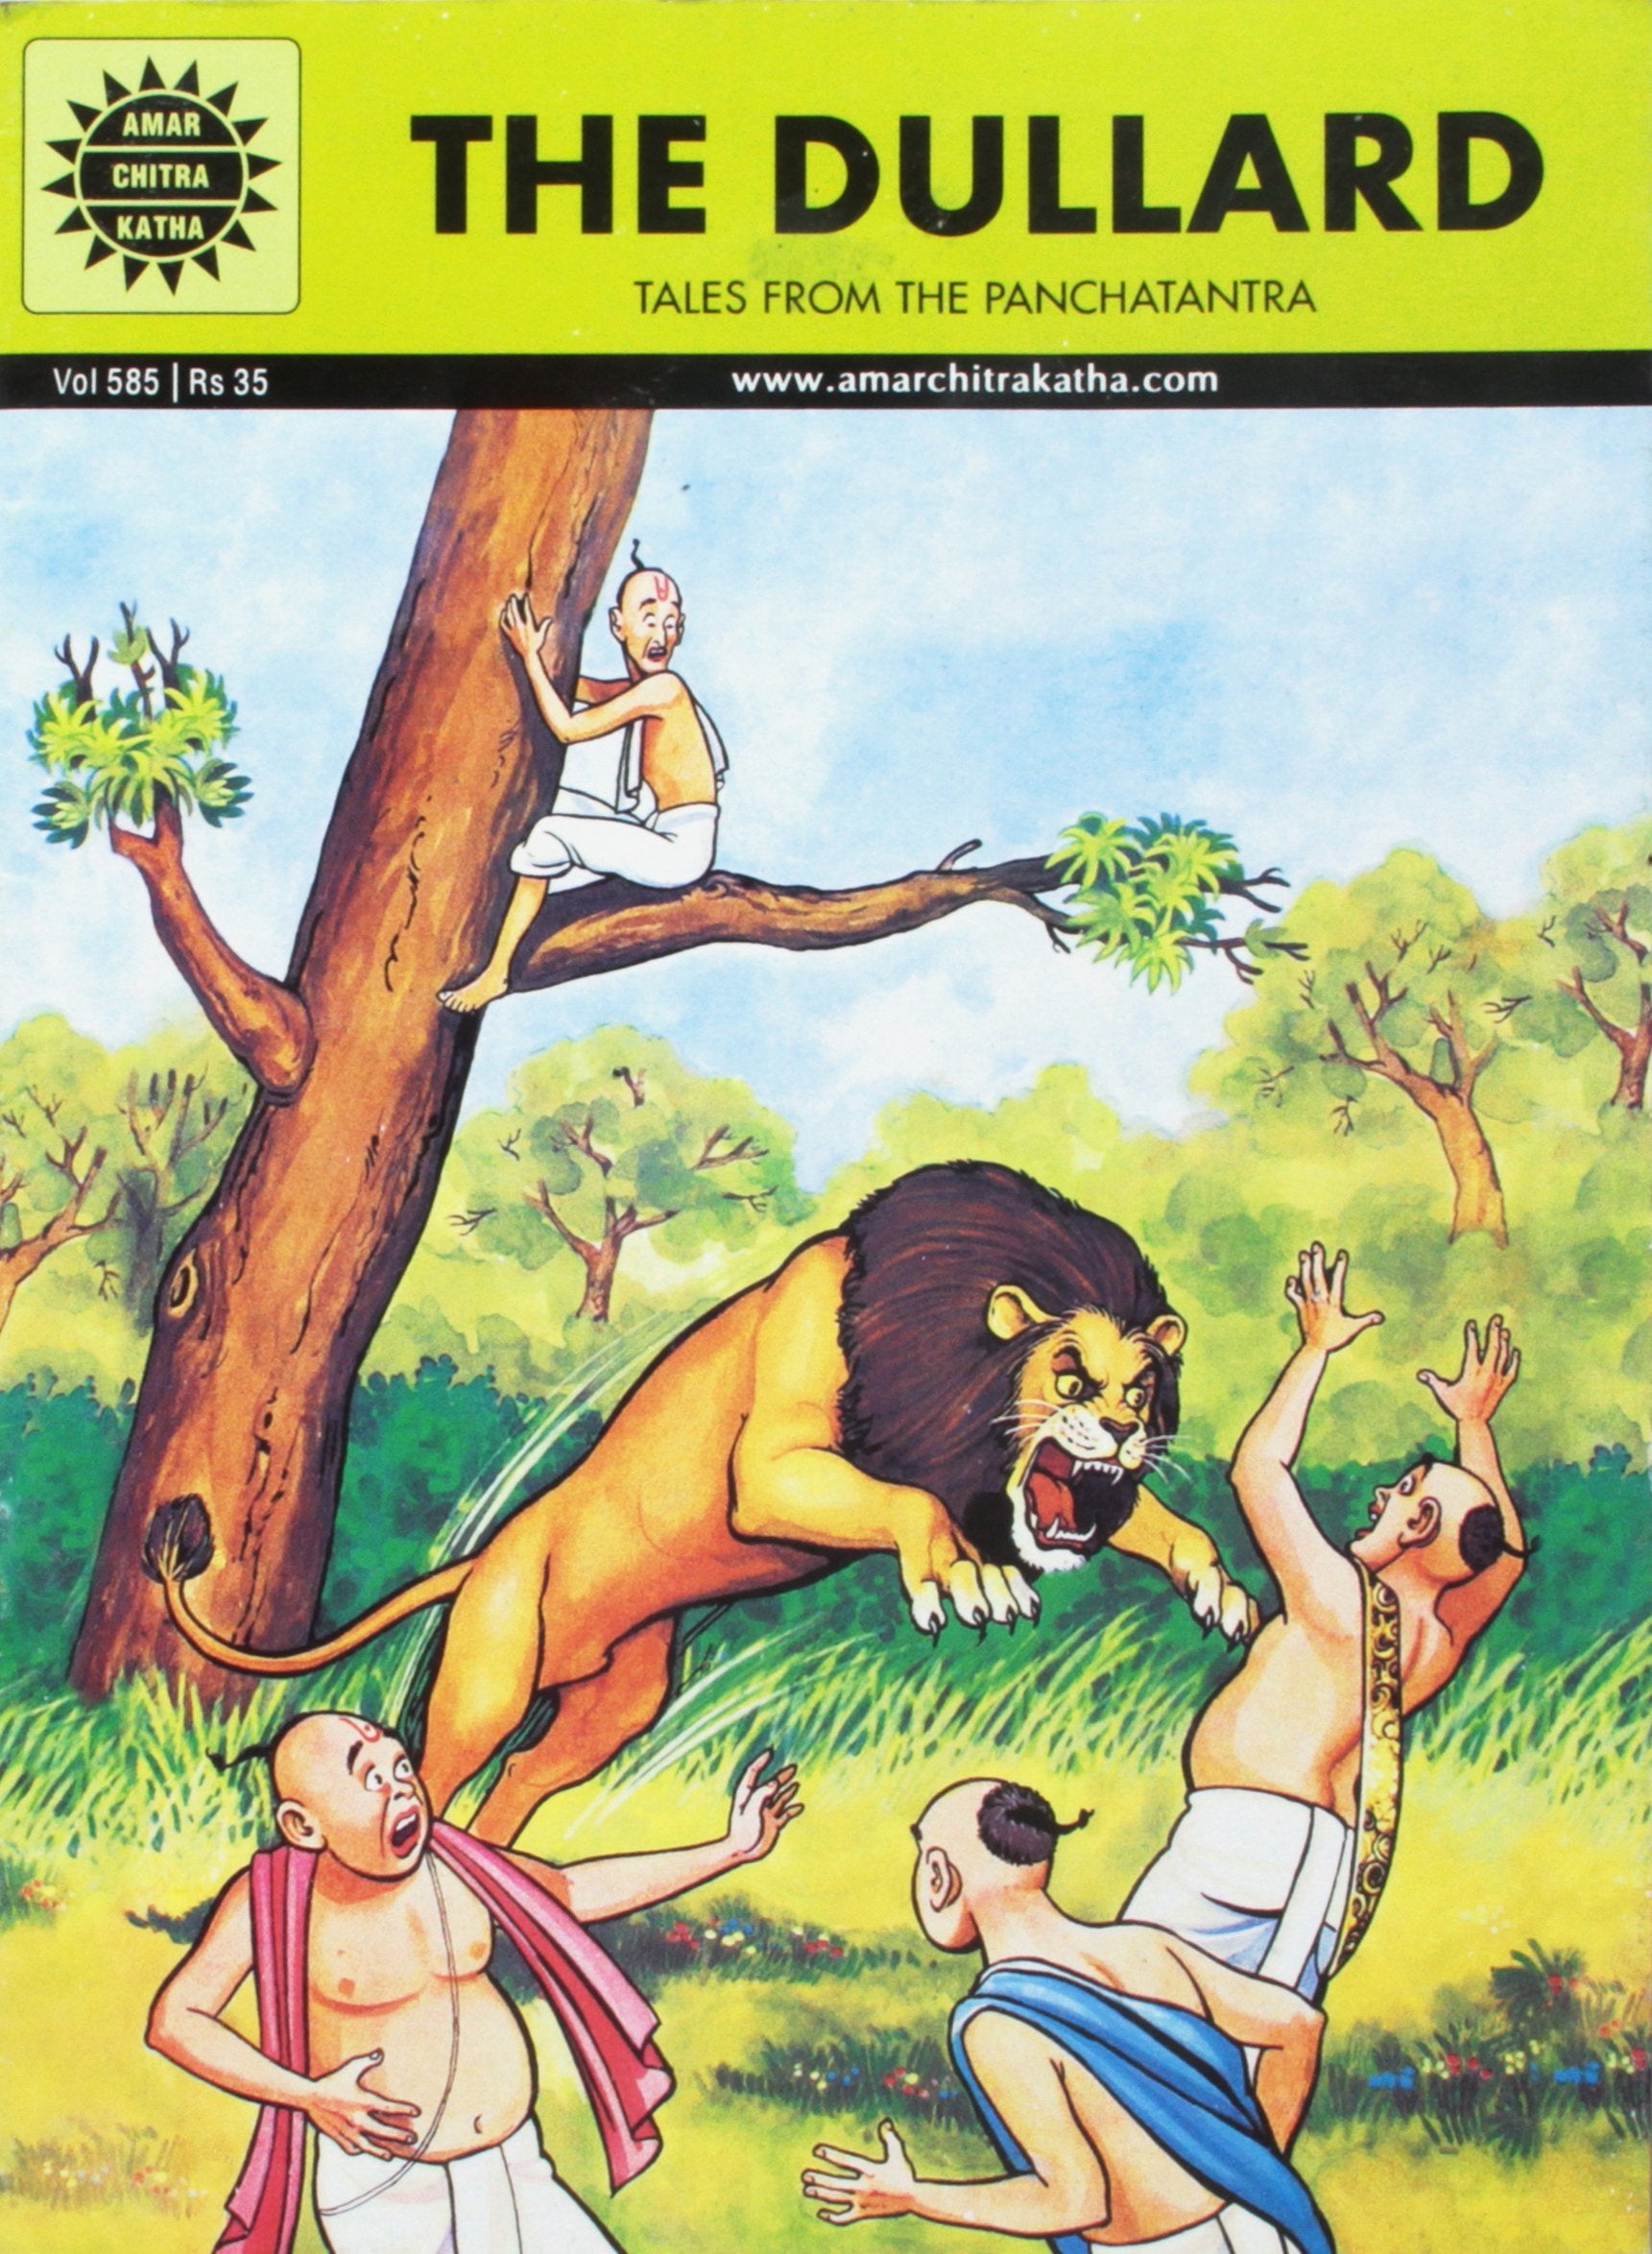 The Dullard: Tales from the Panchatantra